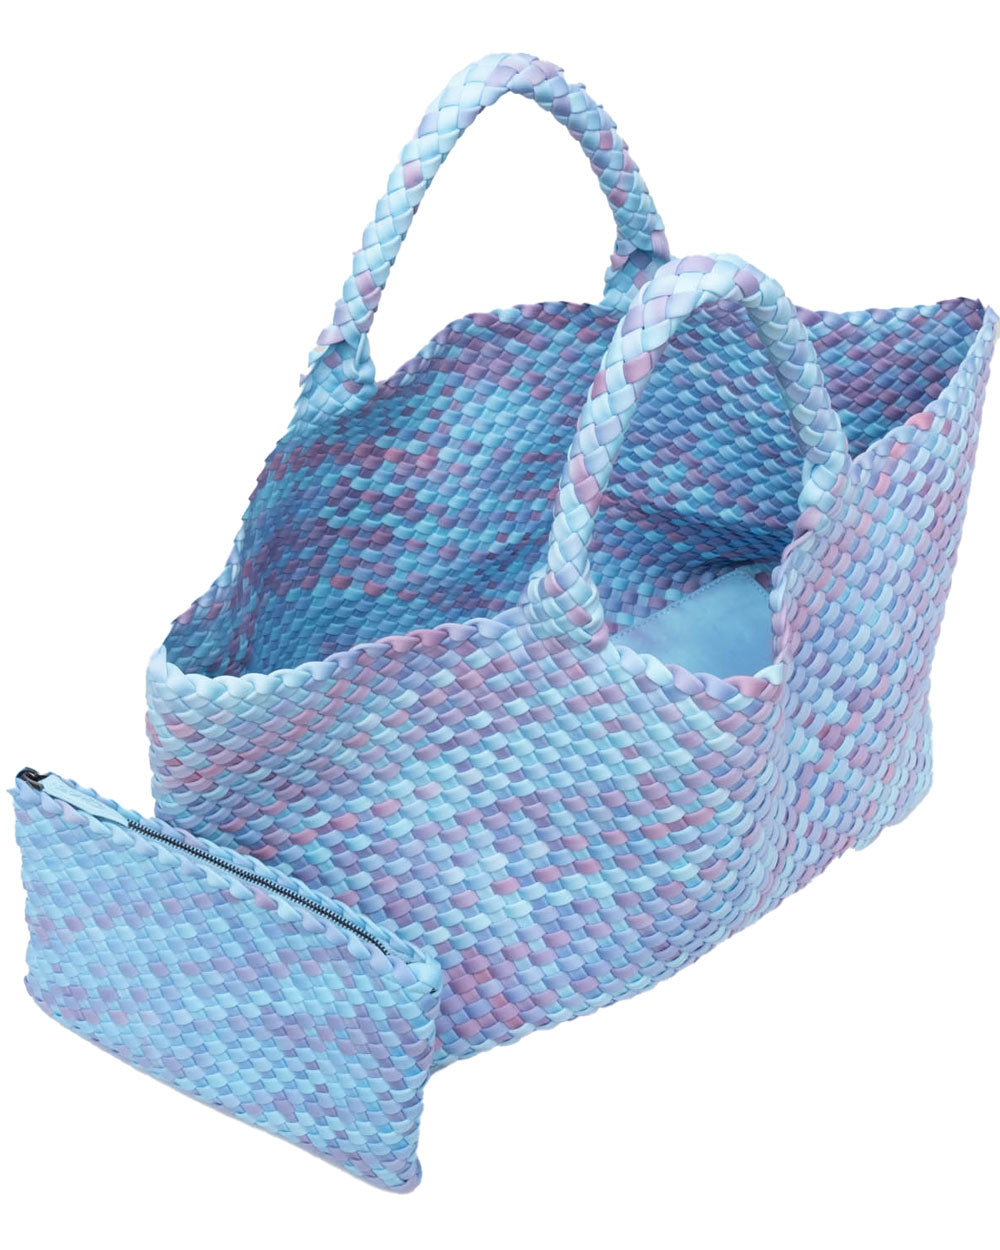 St. Barths Large Tote in Beach Baby